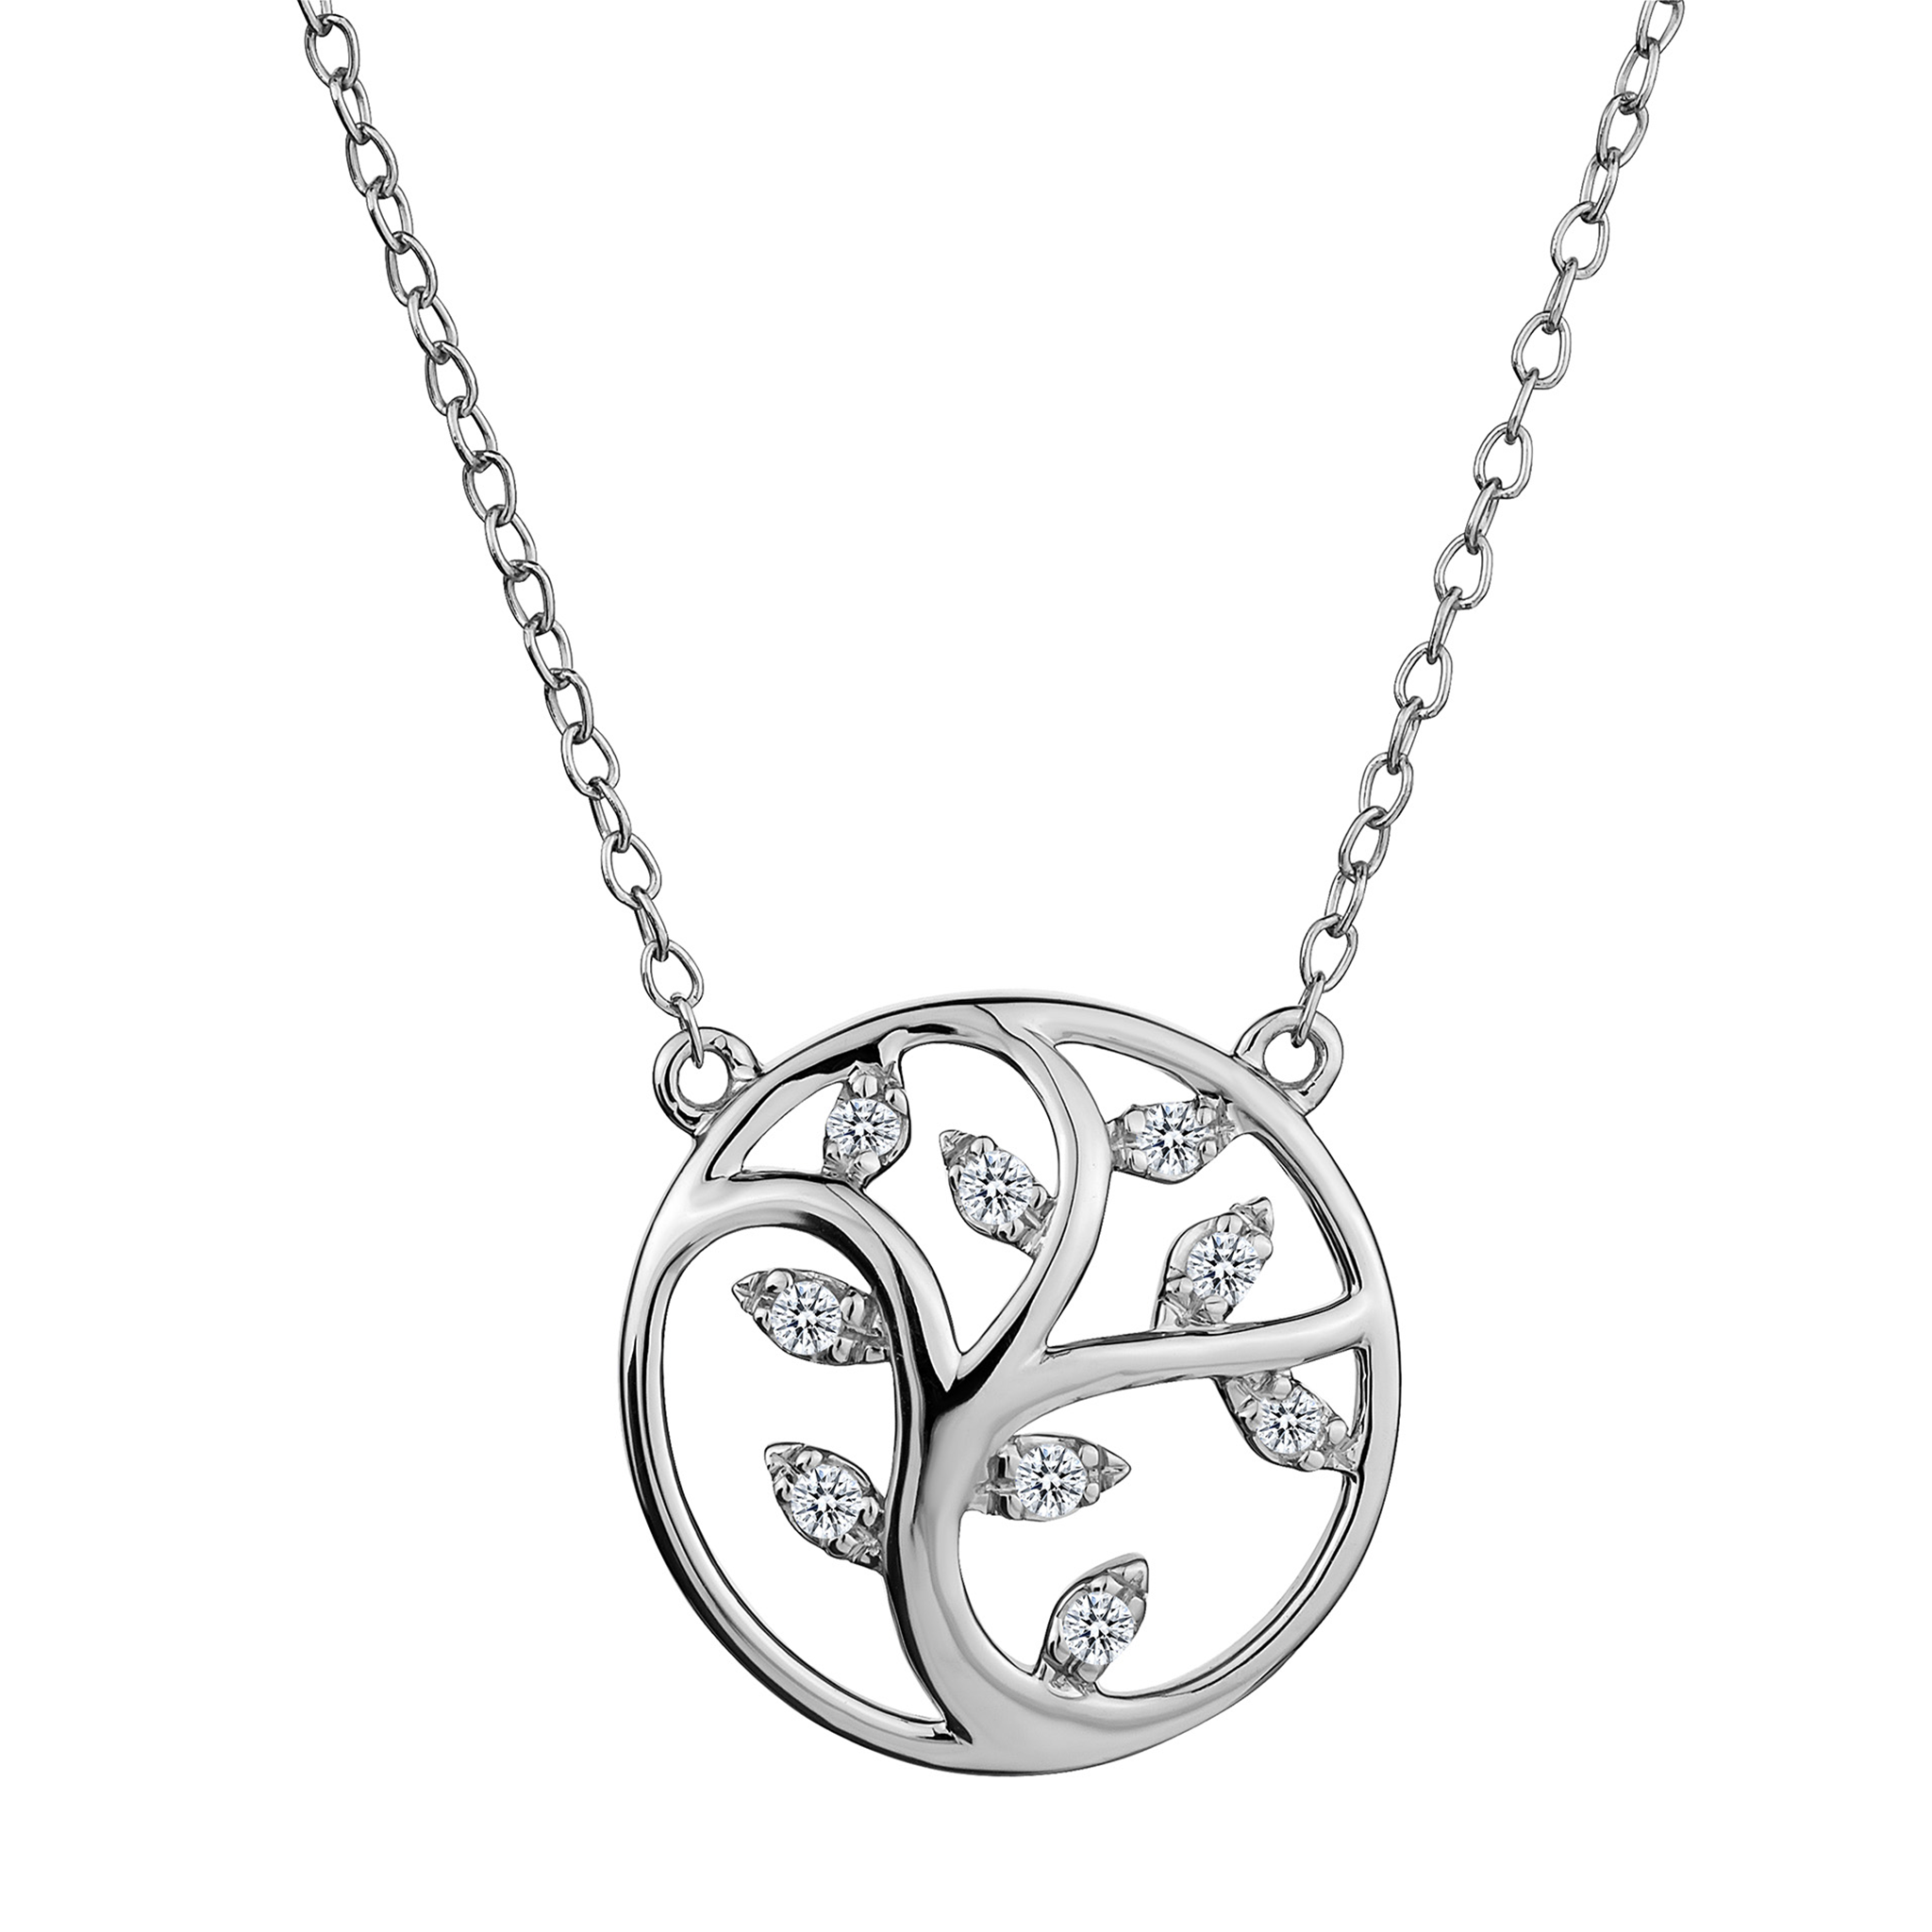 .10 Carat Diamond "Tree of Life" Necklace,  10kt White Gold. Necklaces and Pendants. Griffin Jewellery Designs.